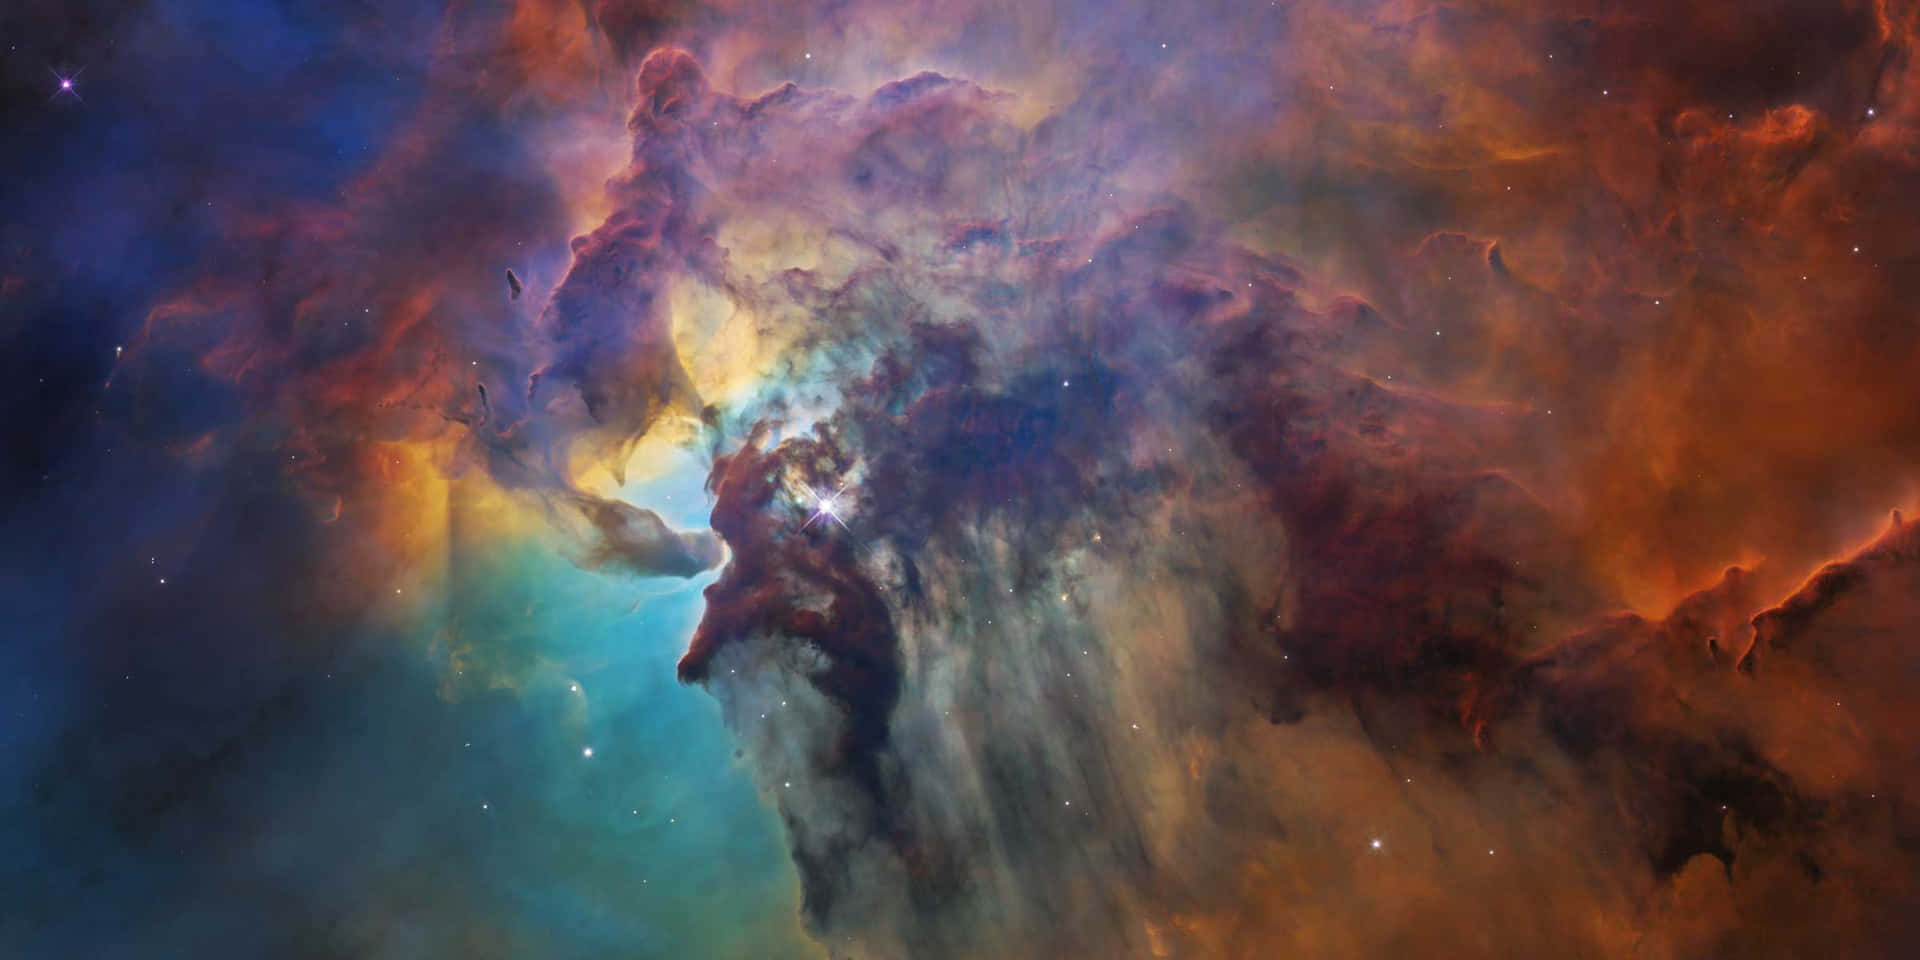 Take a journey to the stars with this vivid image of the Hubble telescope 4K Wallpaper